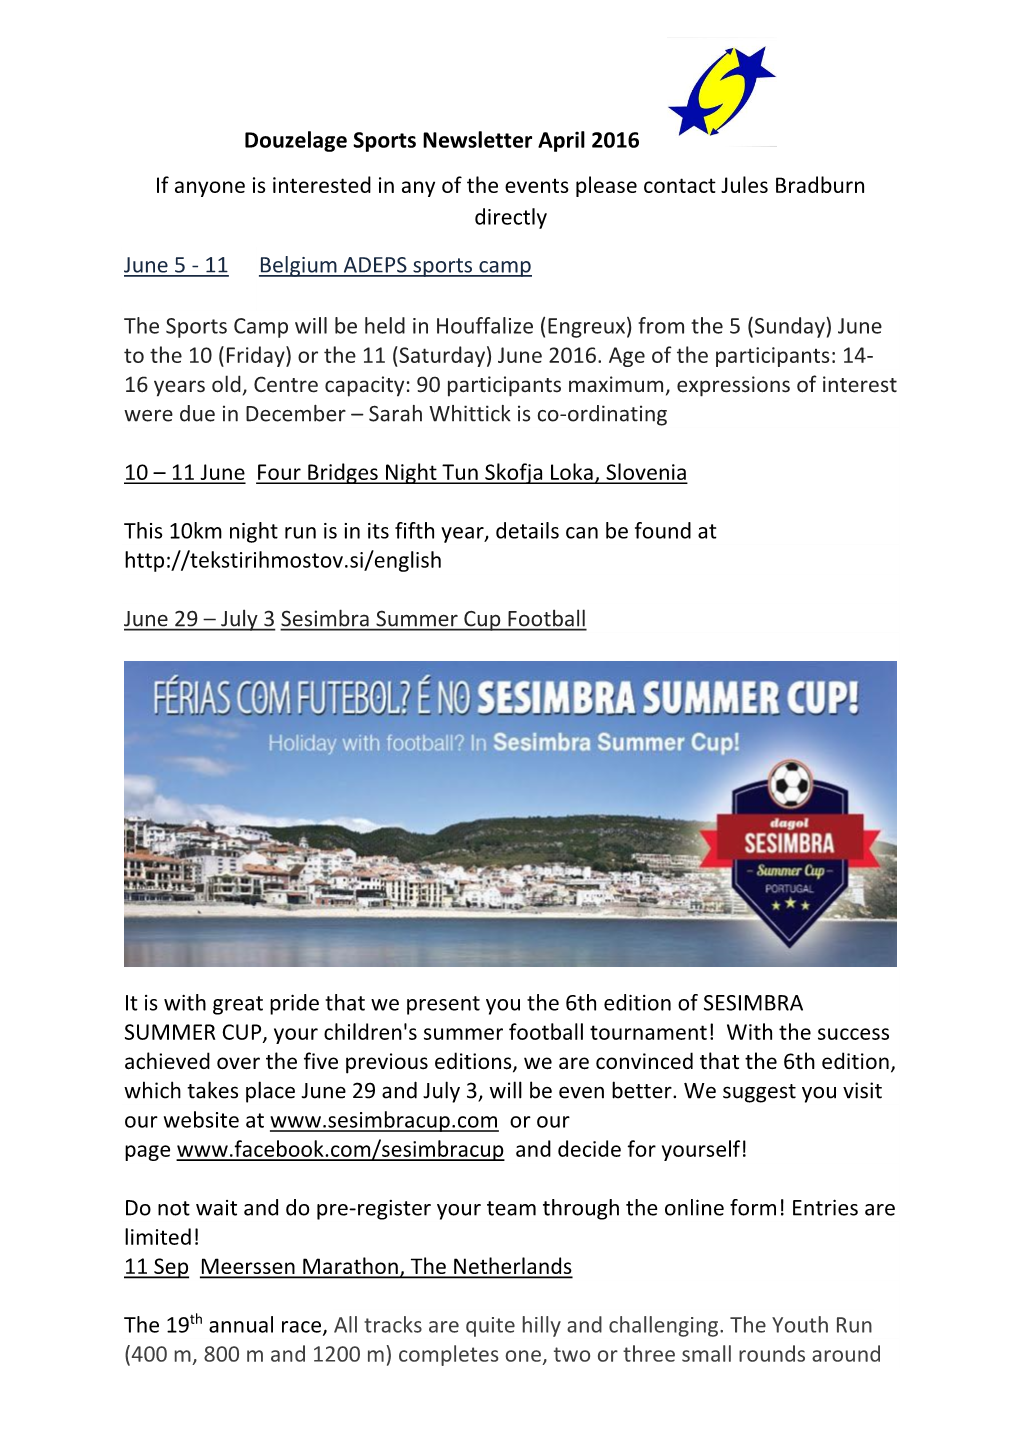 Douzelage Sports Newsletter April 2016 If Anyone Is Interested in Any of the Events Please Contact Jules Bradburn Directly June 5 - 11 Belgium ADEPS Sports Camp